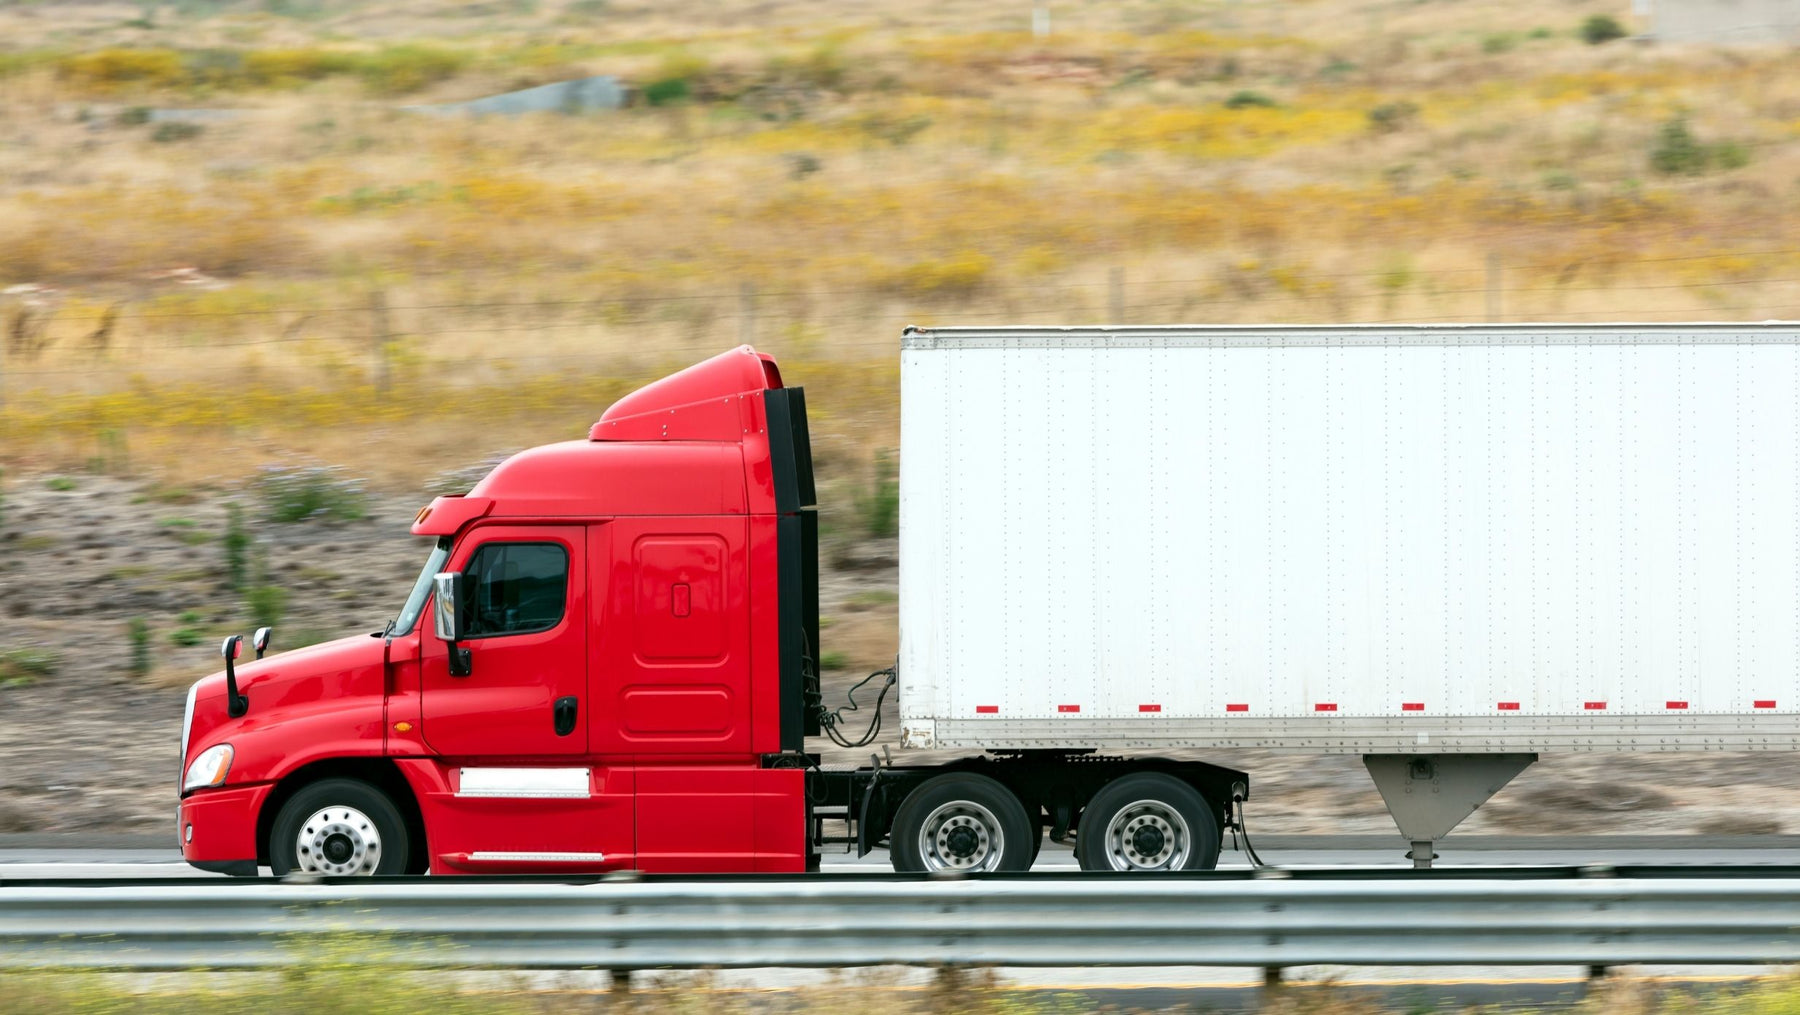 5 Cool Tips For Those Hot Summer Trucking Days